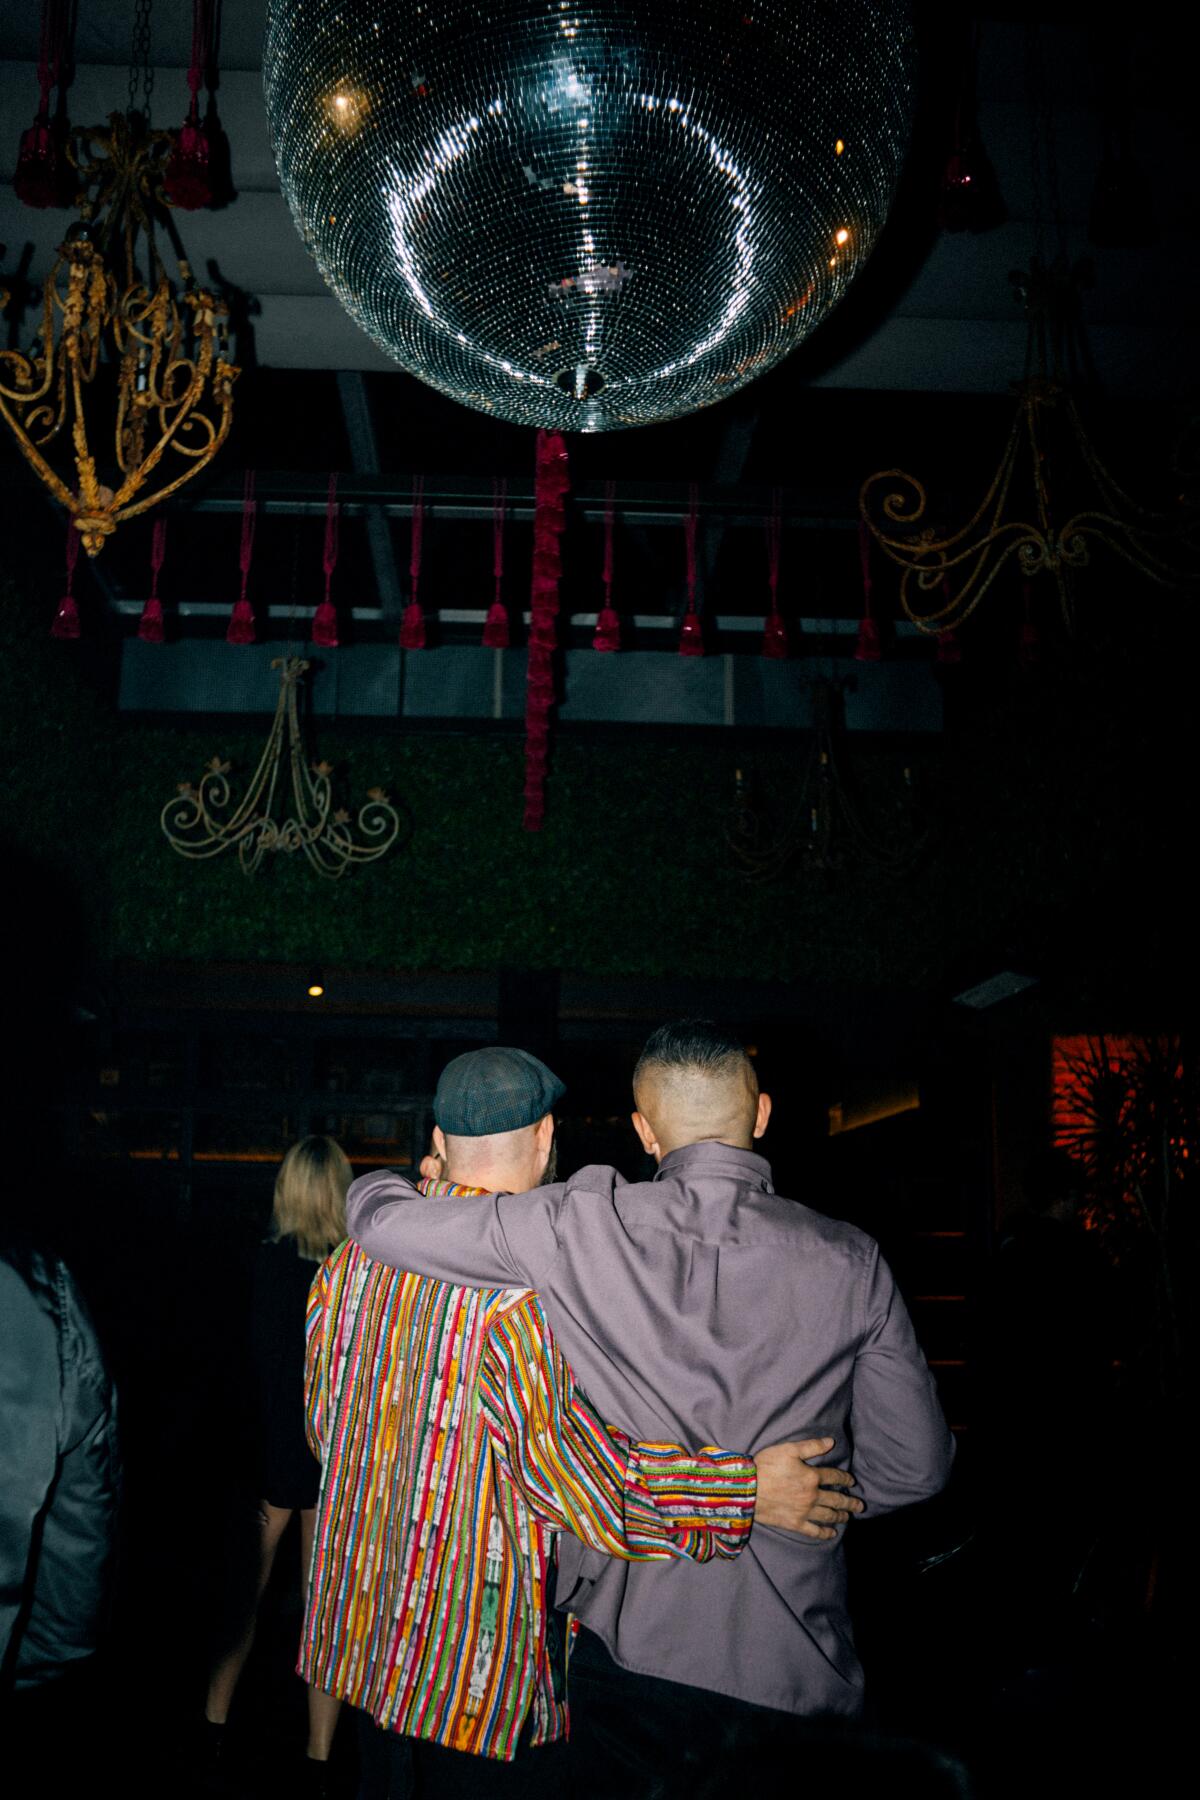 Two men hugging on the dance floor of a nightclub above a disco ball